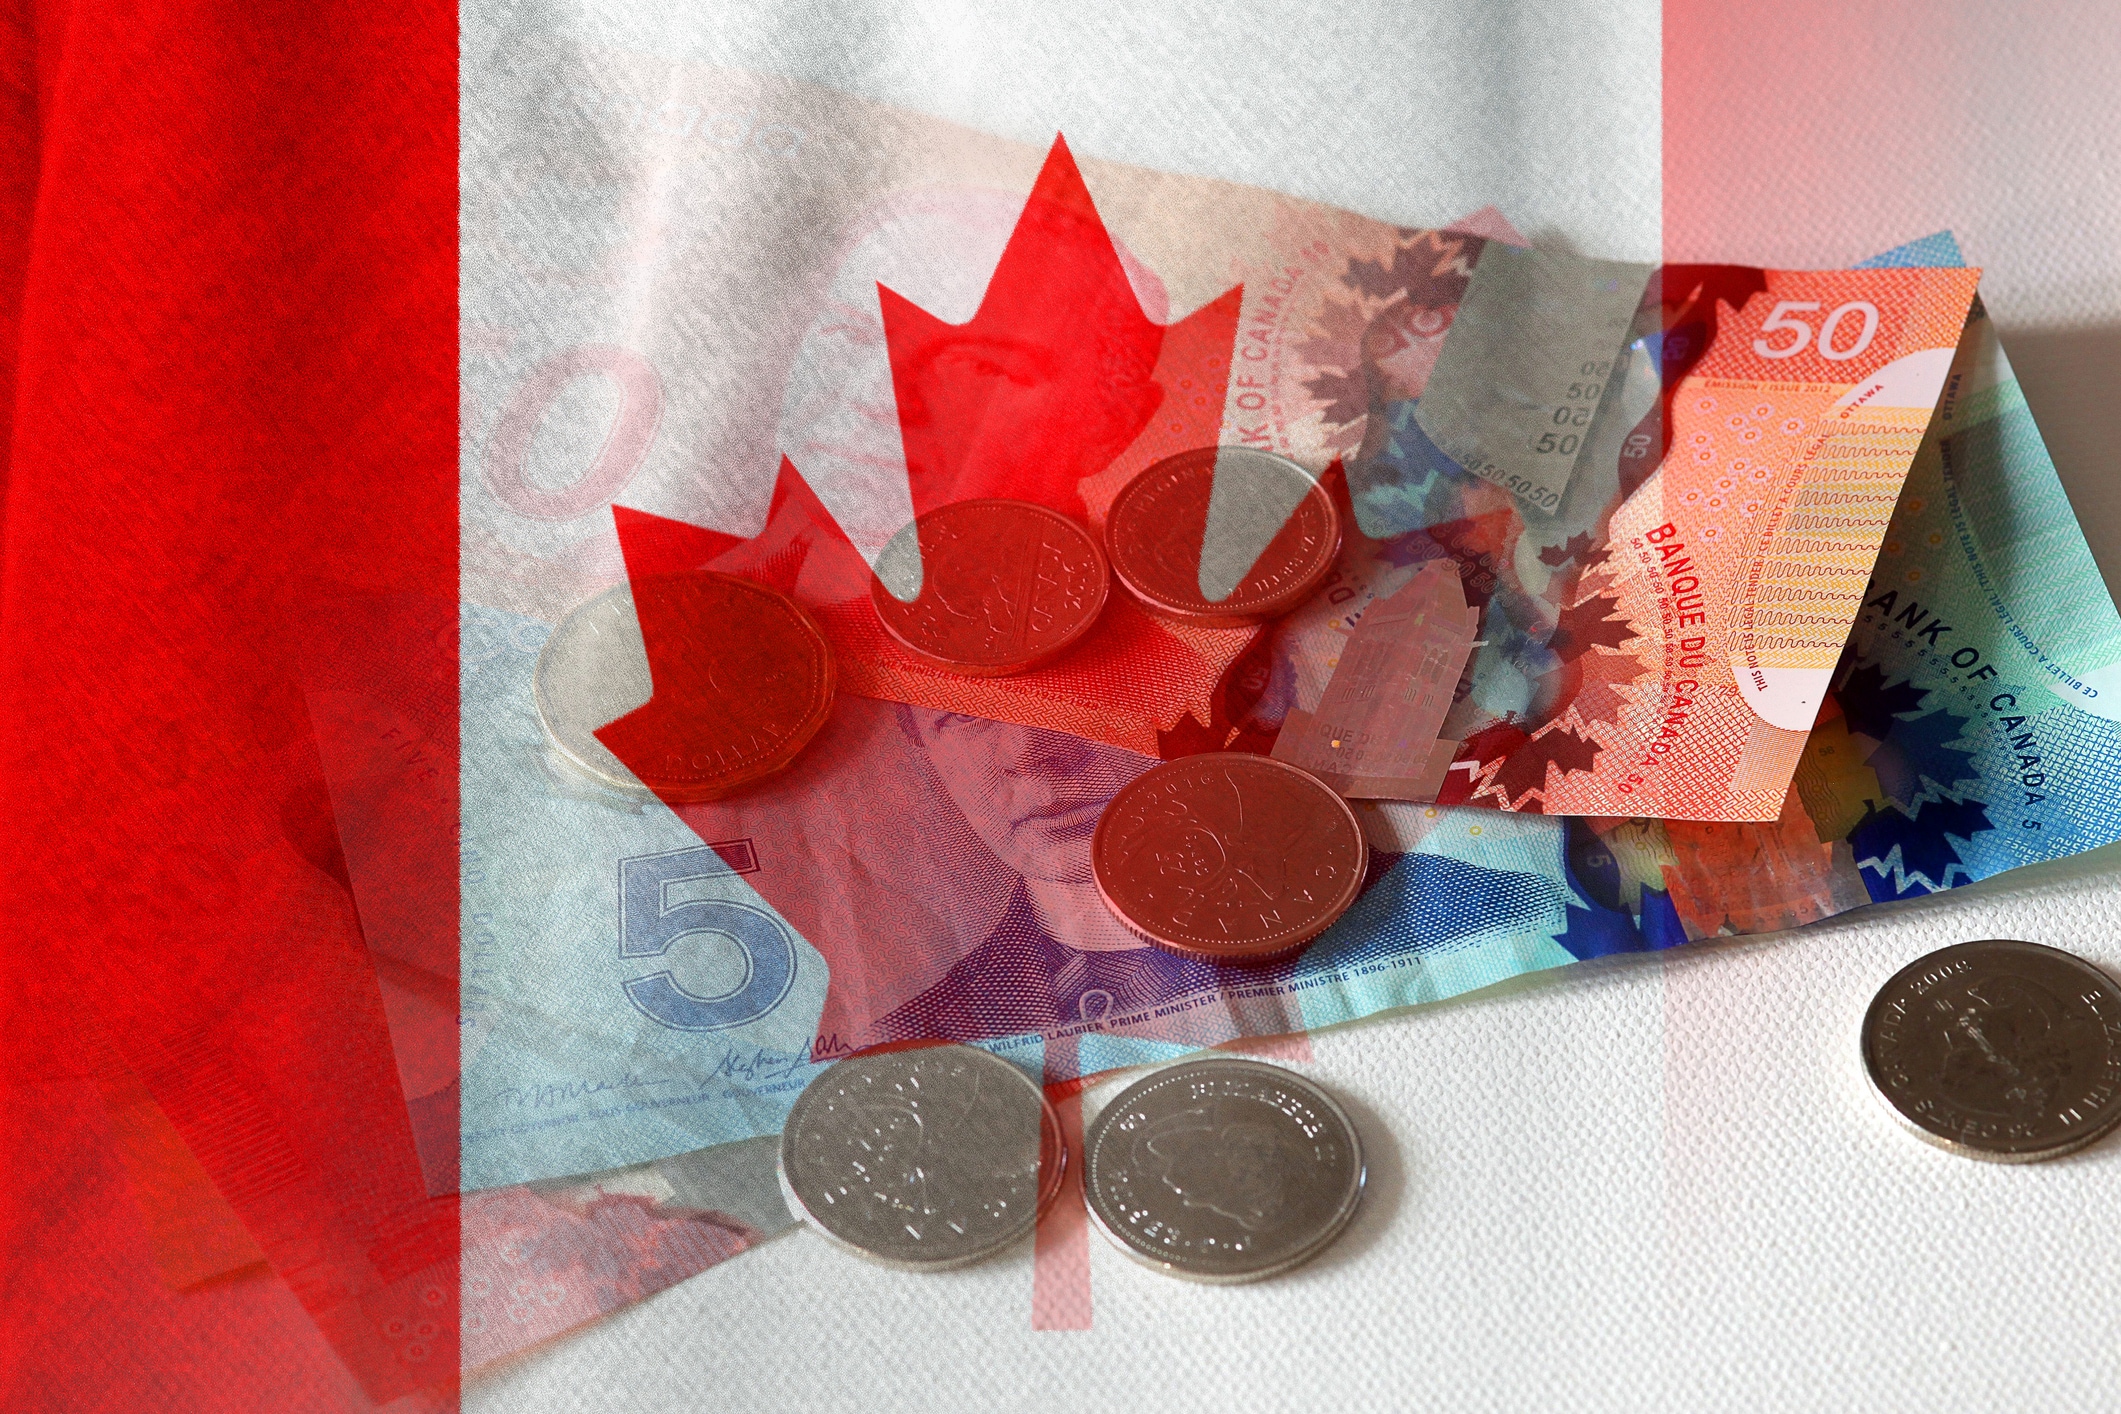 European markets tread water as the Bank of Canada hikes rates by 25bps